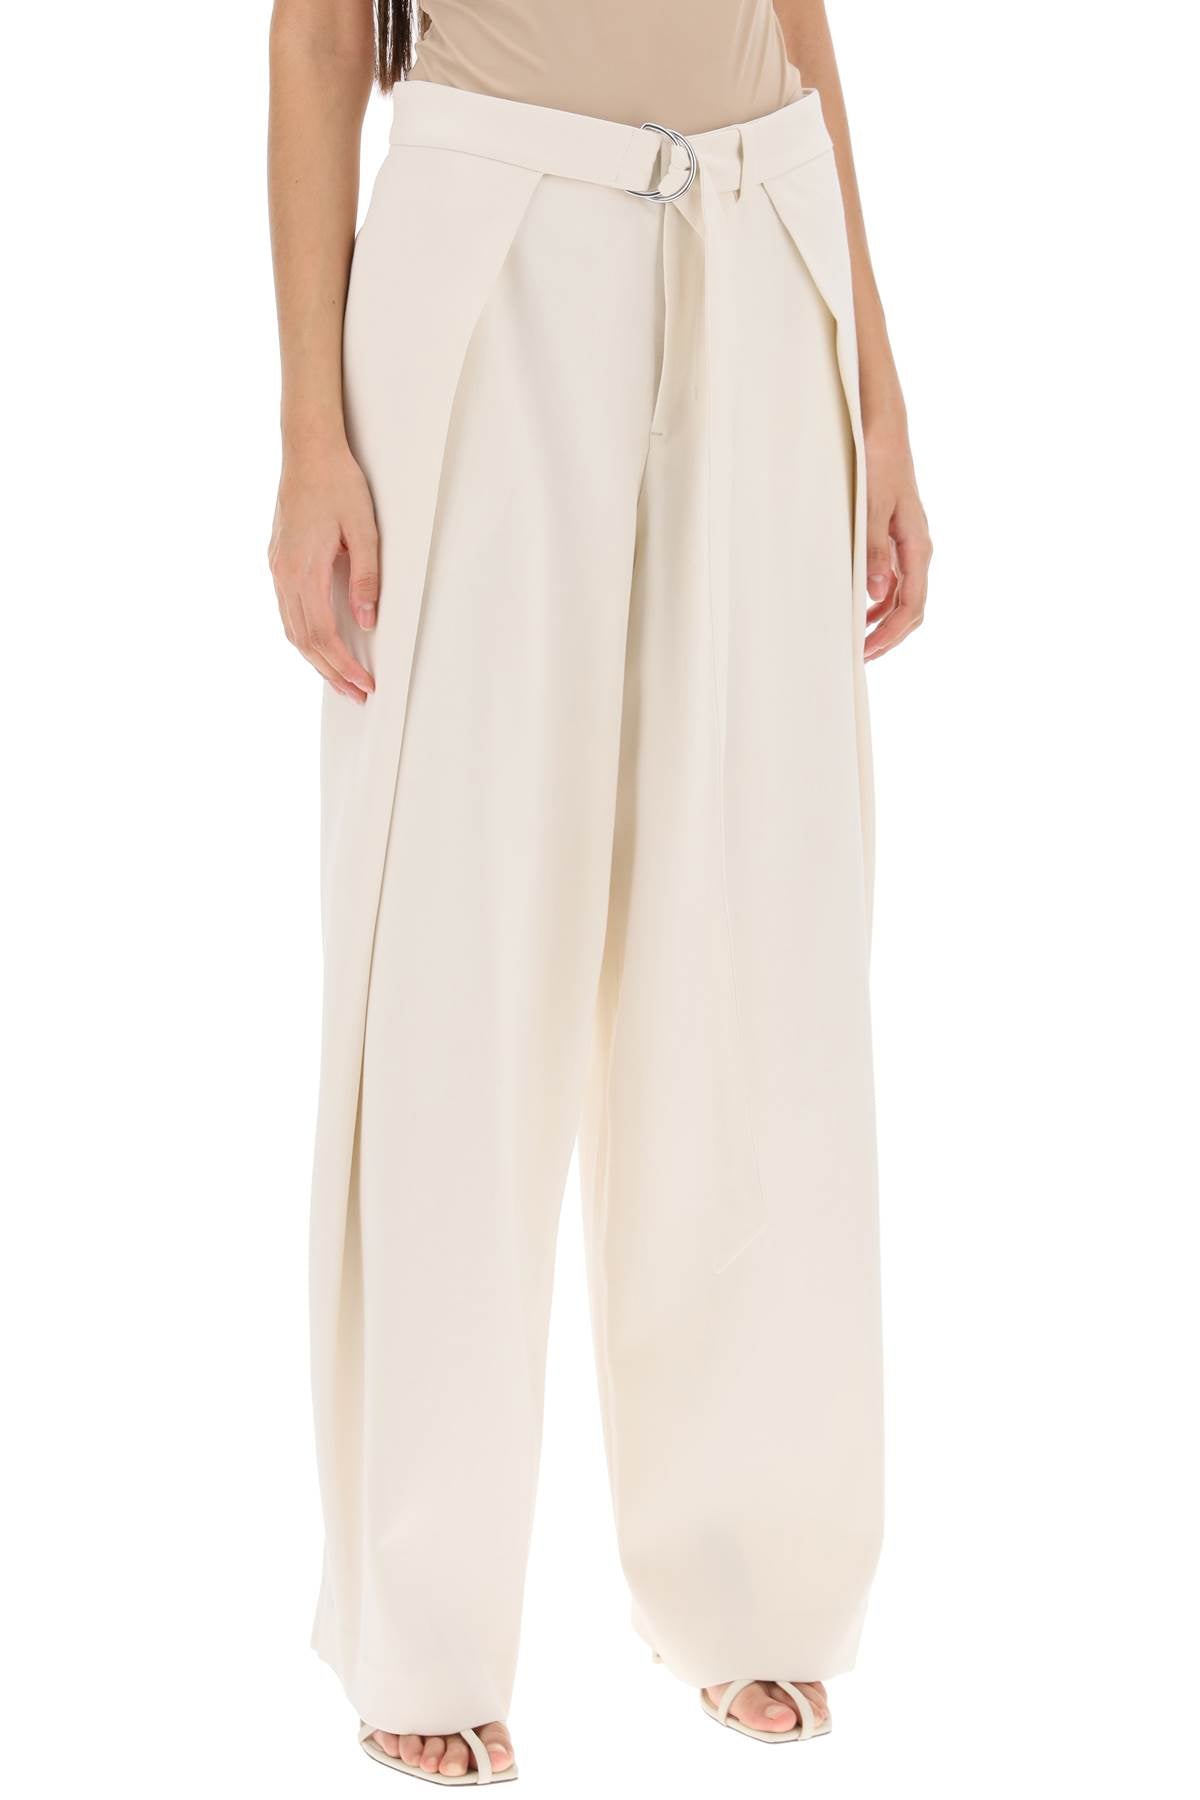 Ami paris wide fit pants with floating panels-1